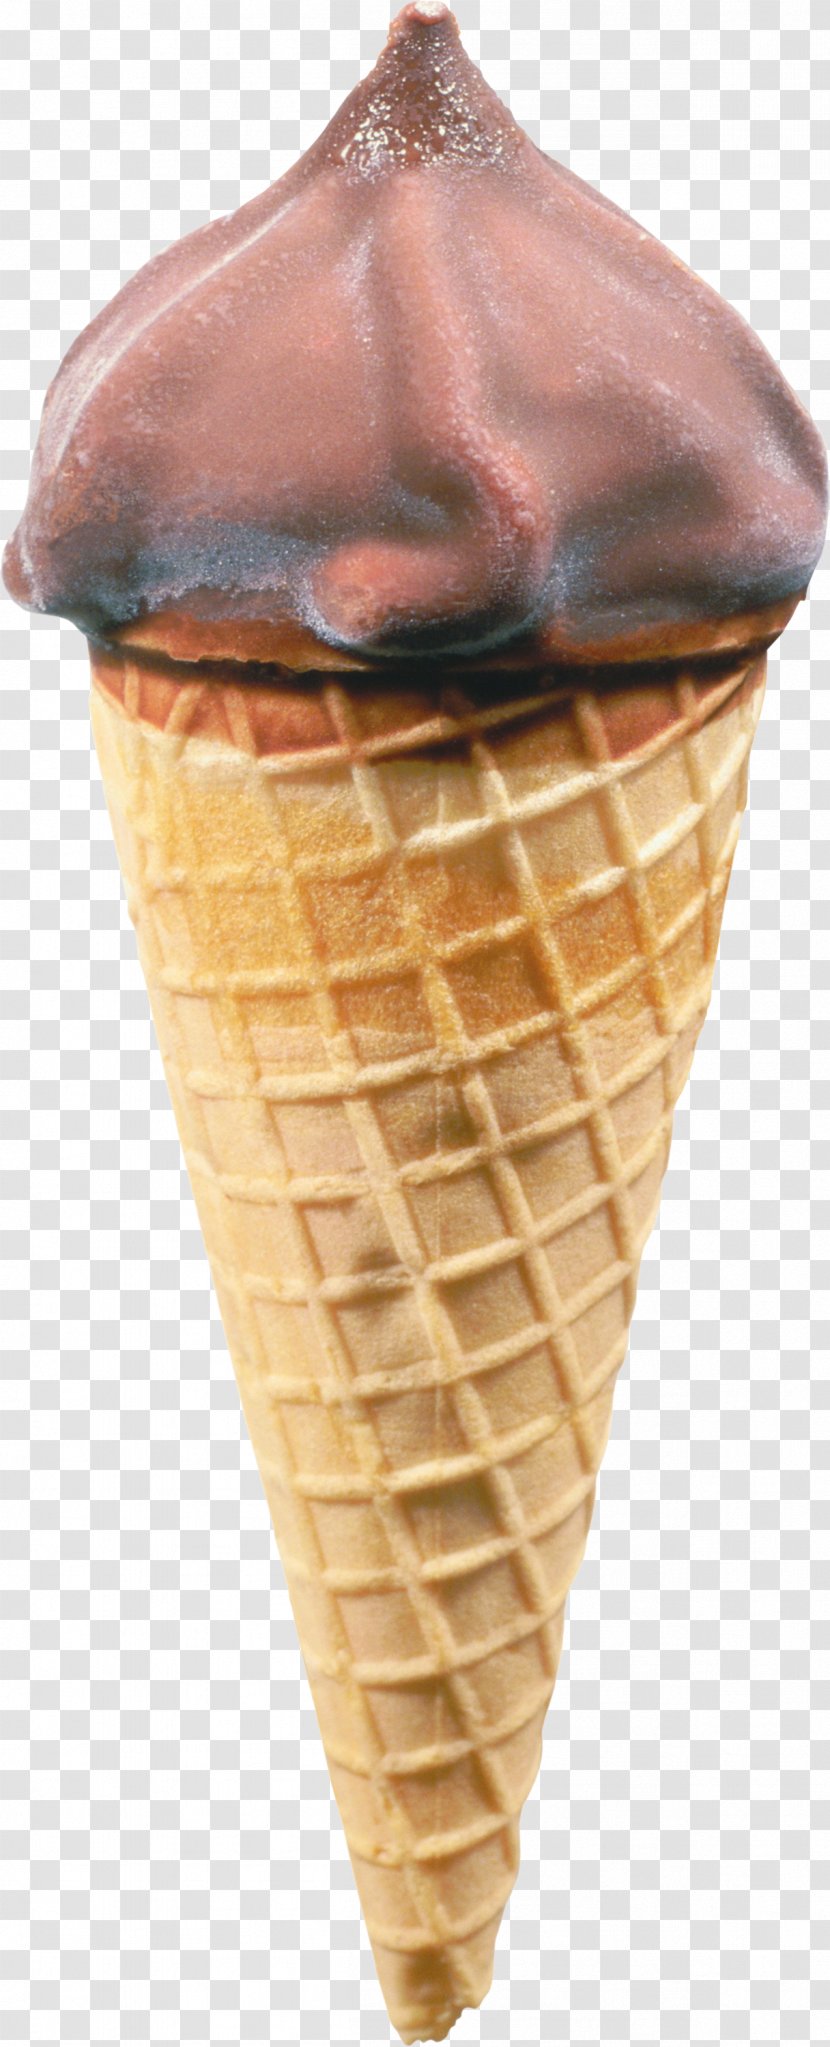 Ice Cream Cones Chocolate Waffle - Wafer Transparent PNG